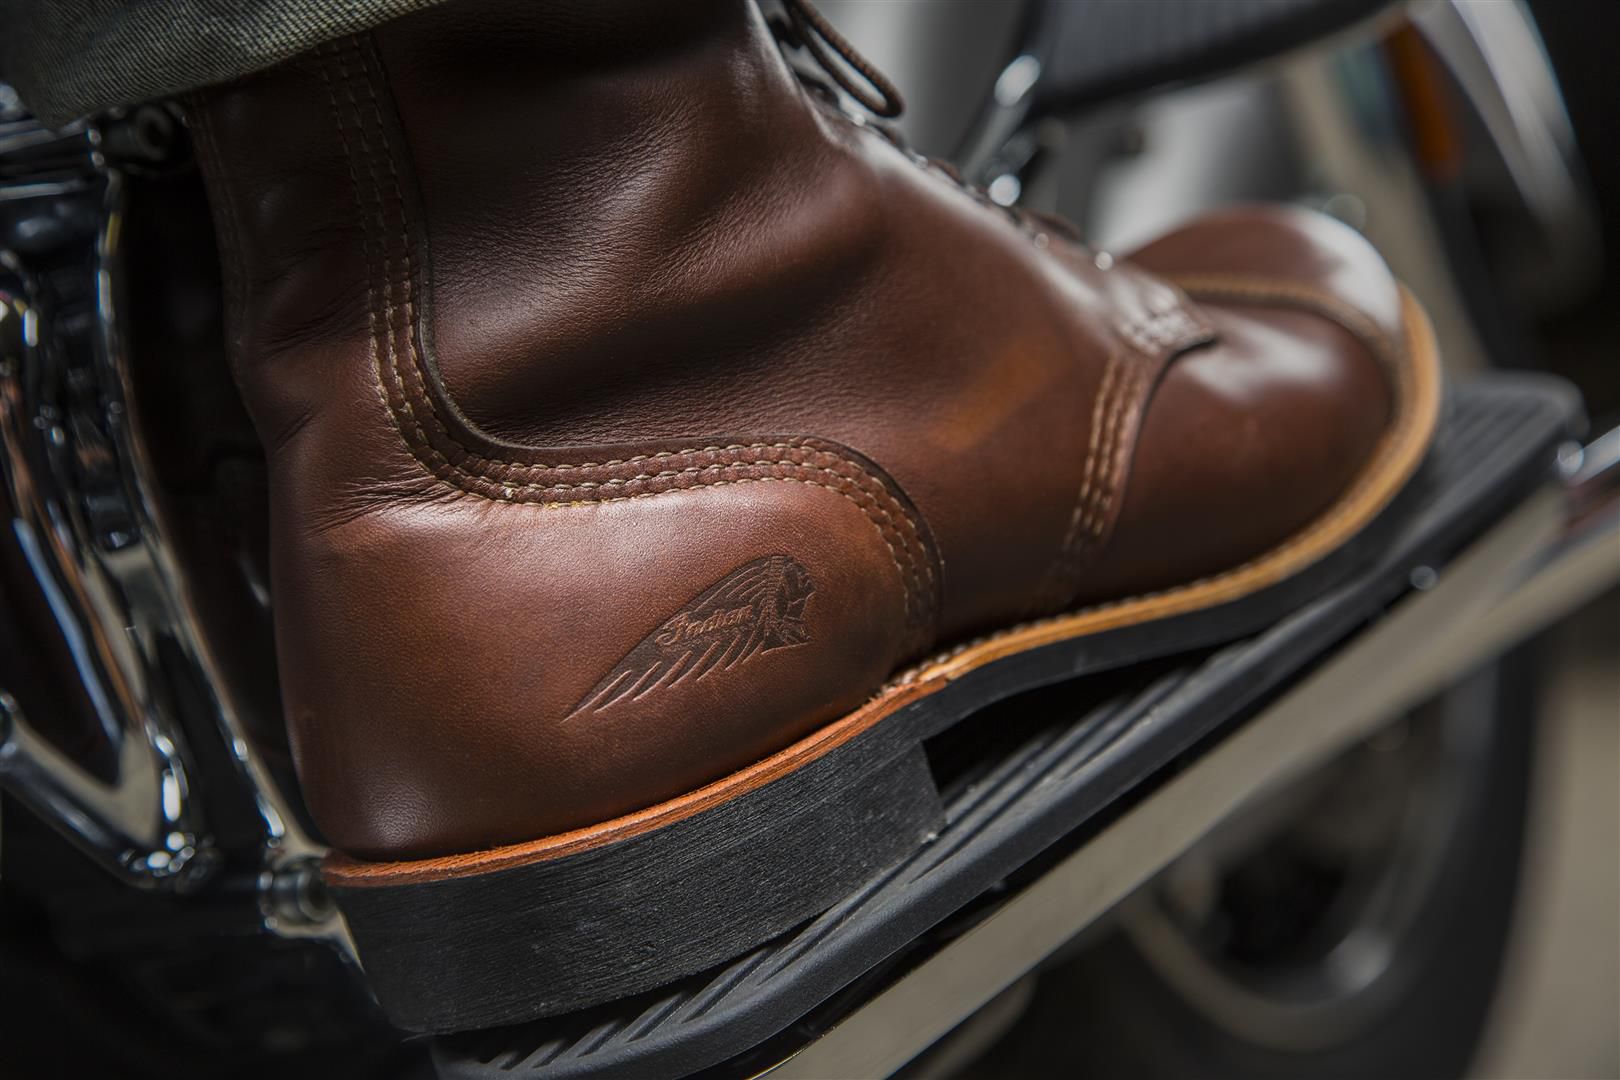 uhyre Politistation Bær Red Wing Motorcycle Boots by Indian | Cycle World